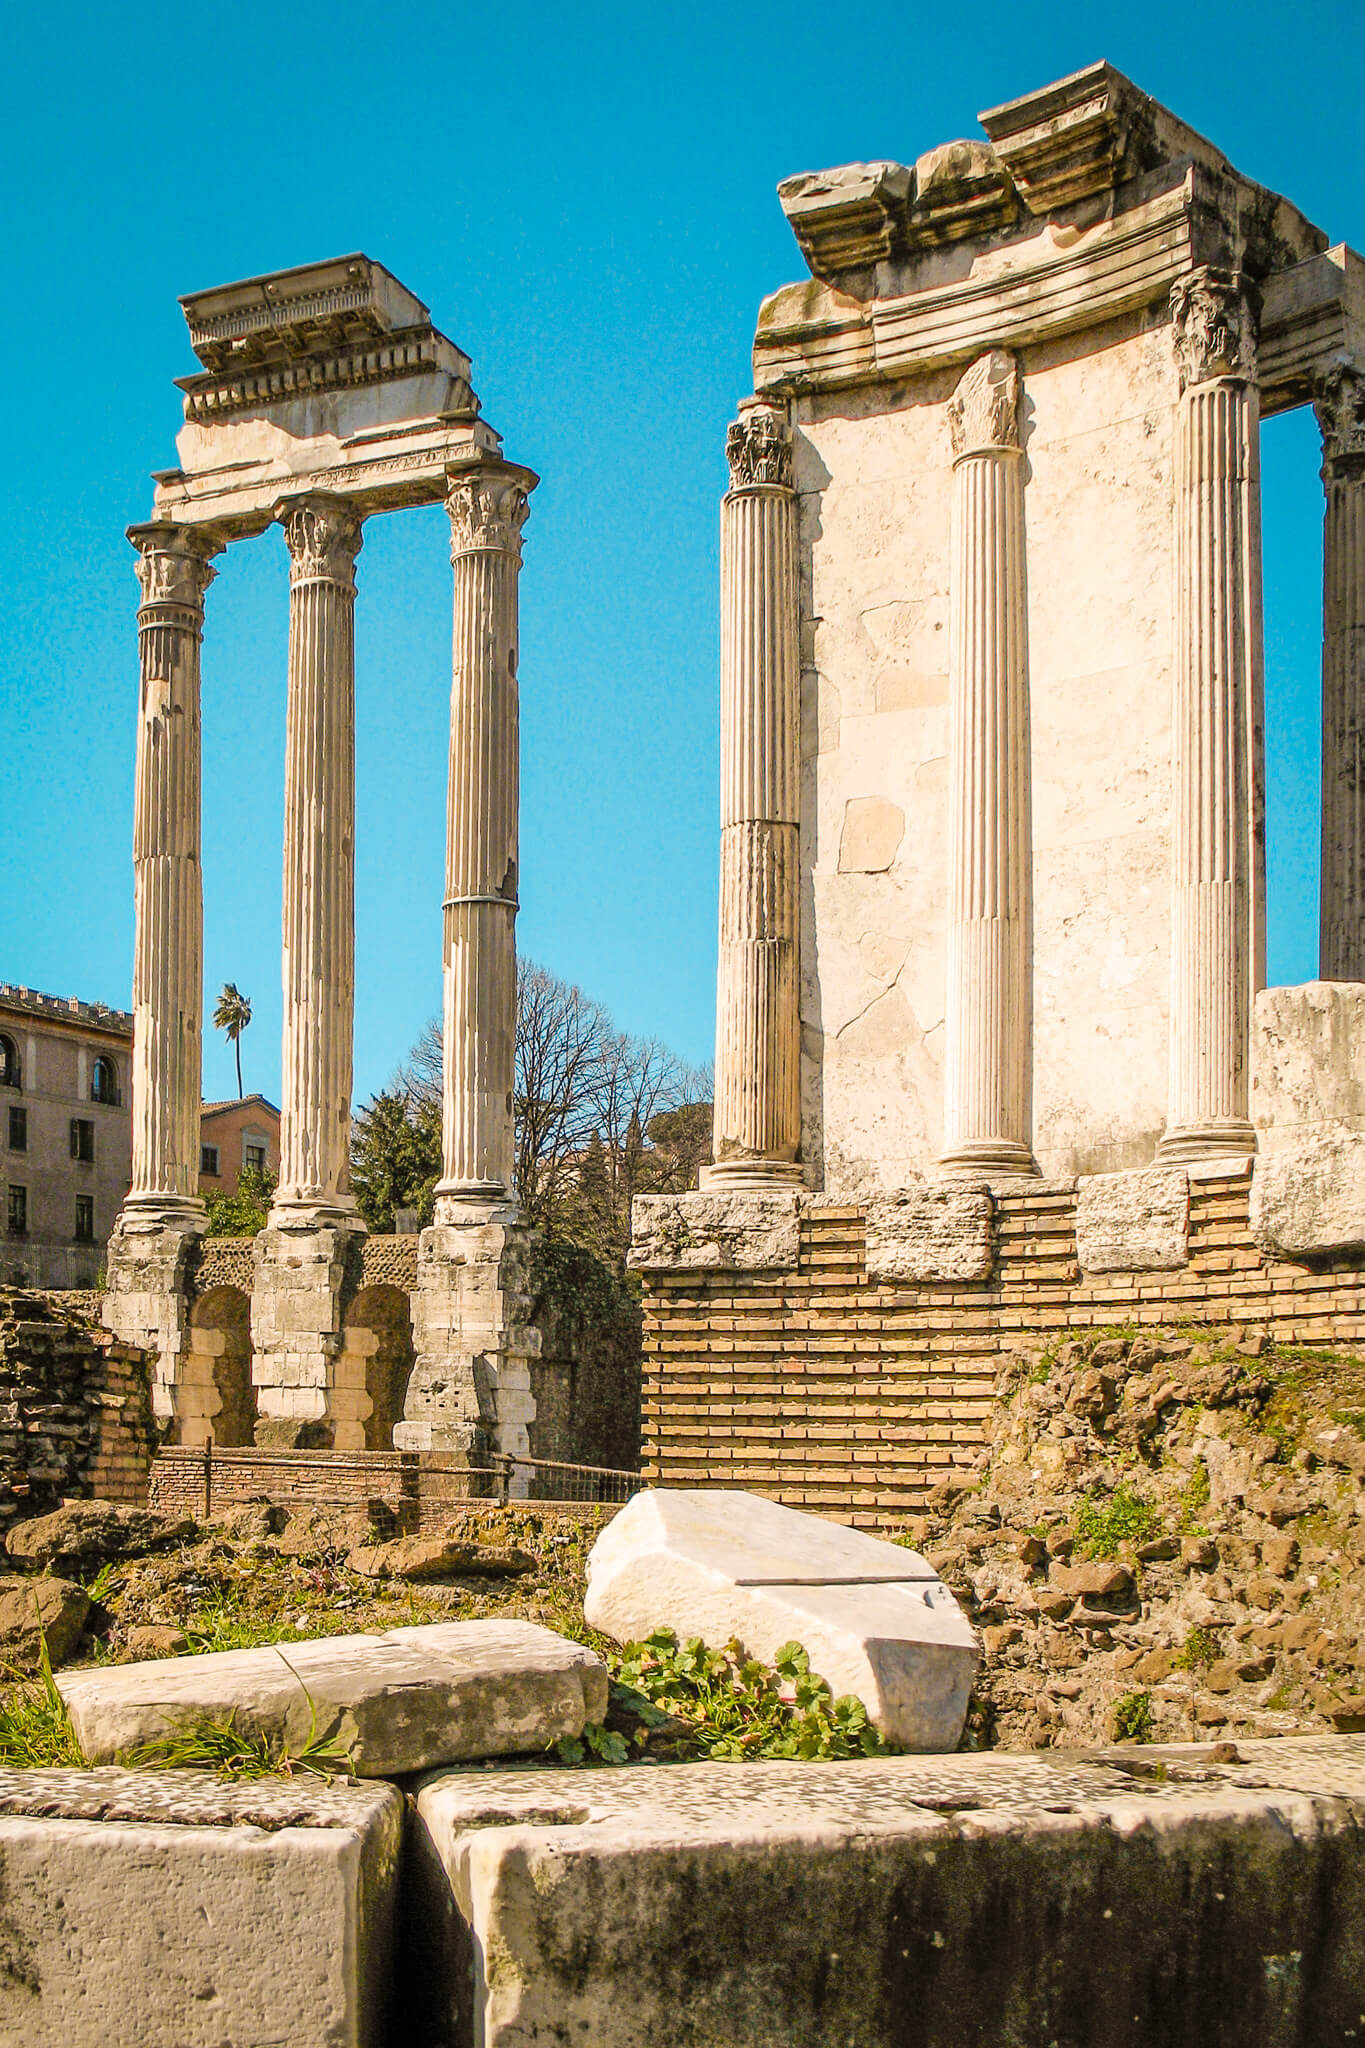 The remains of the Temple of Vesta in the Roman Forum